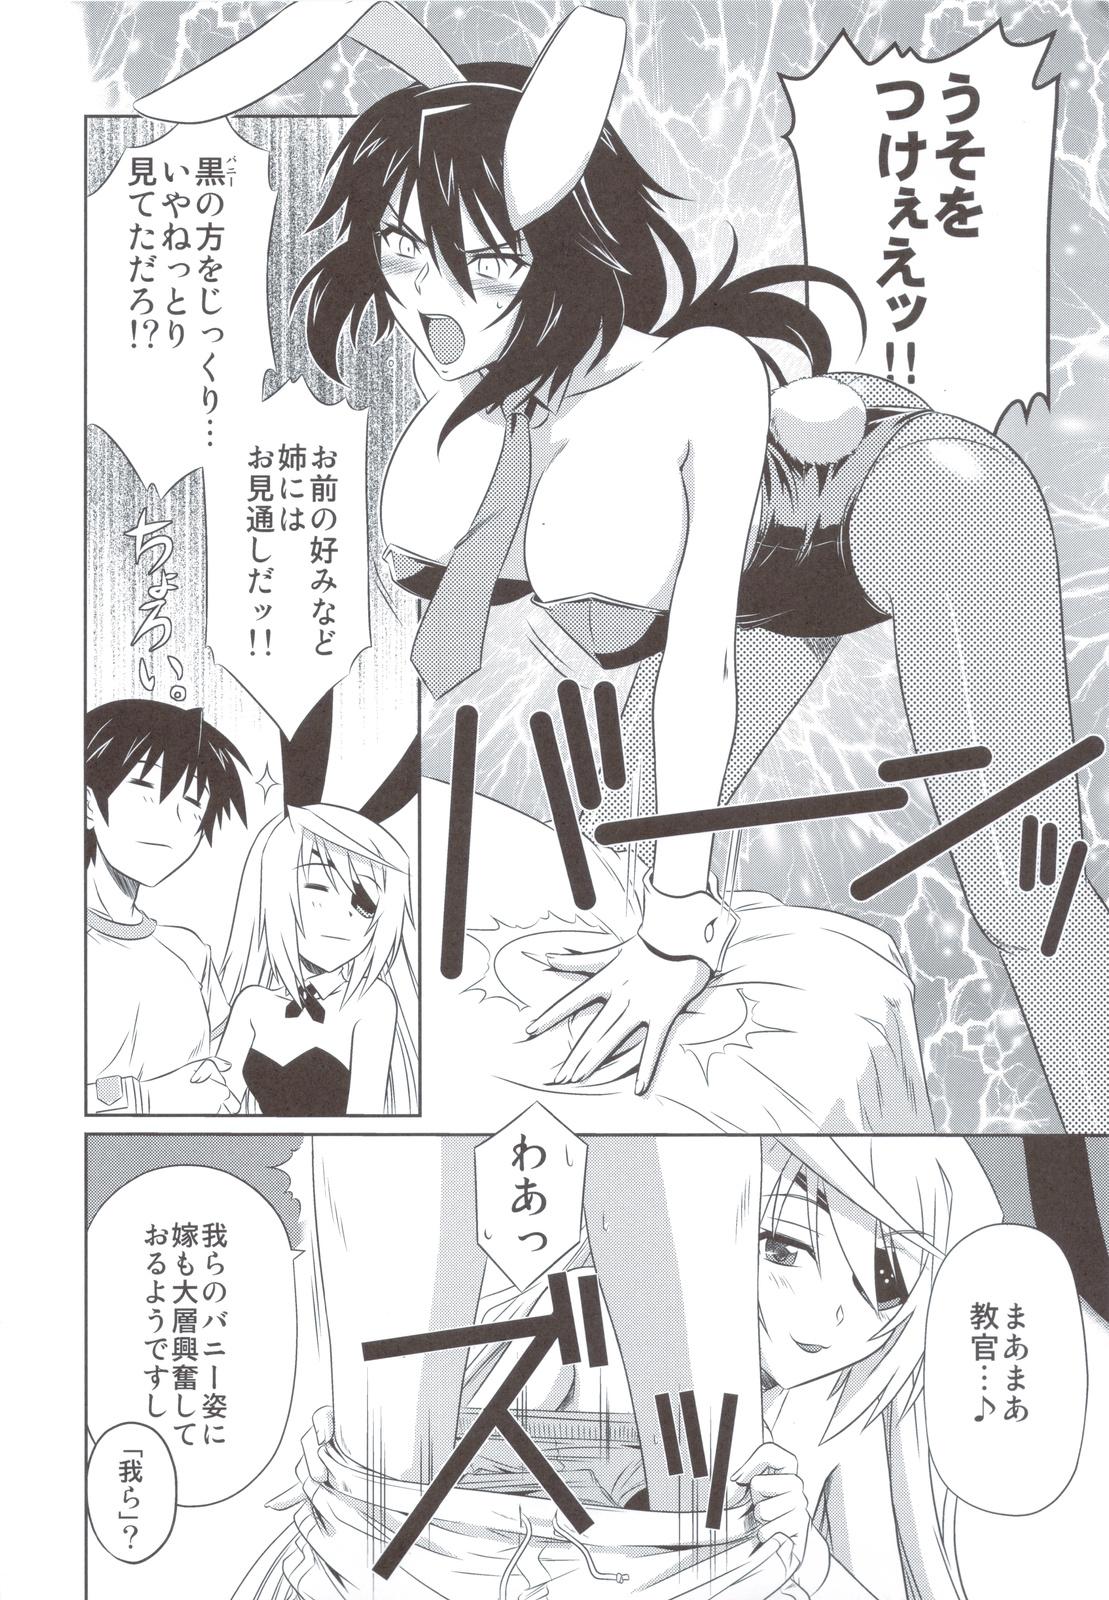 Domination is Incest Strategy 3 - Infinite stratos Twinks - Page 5